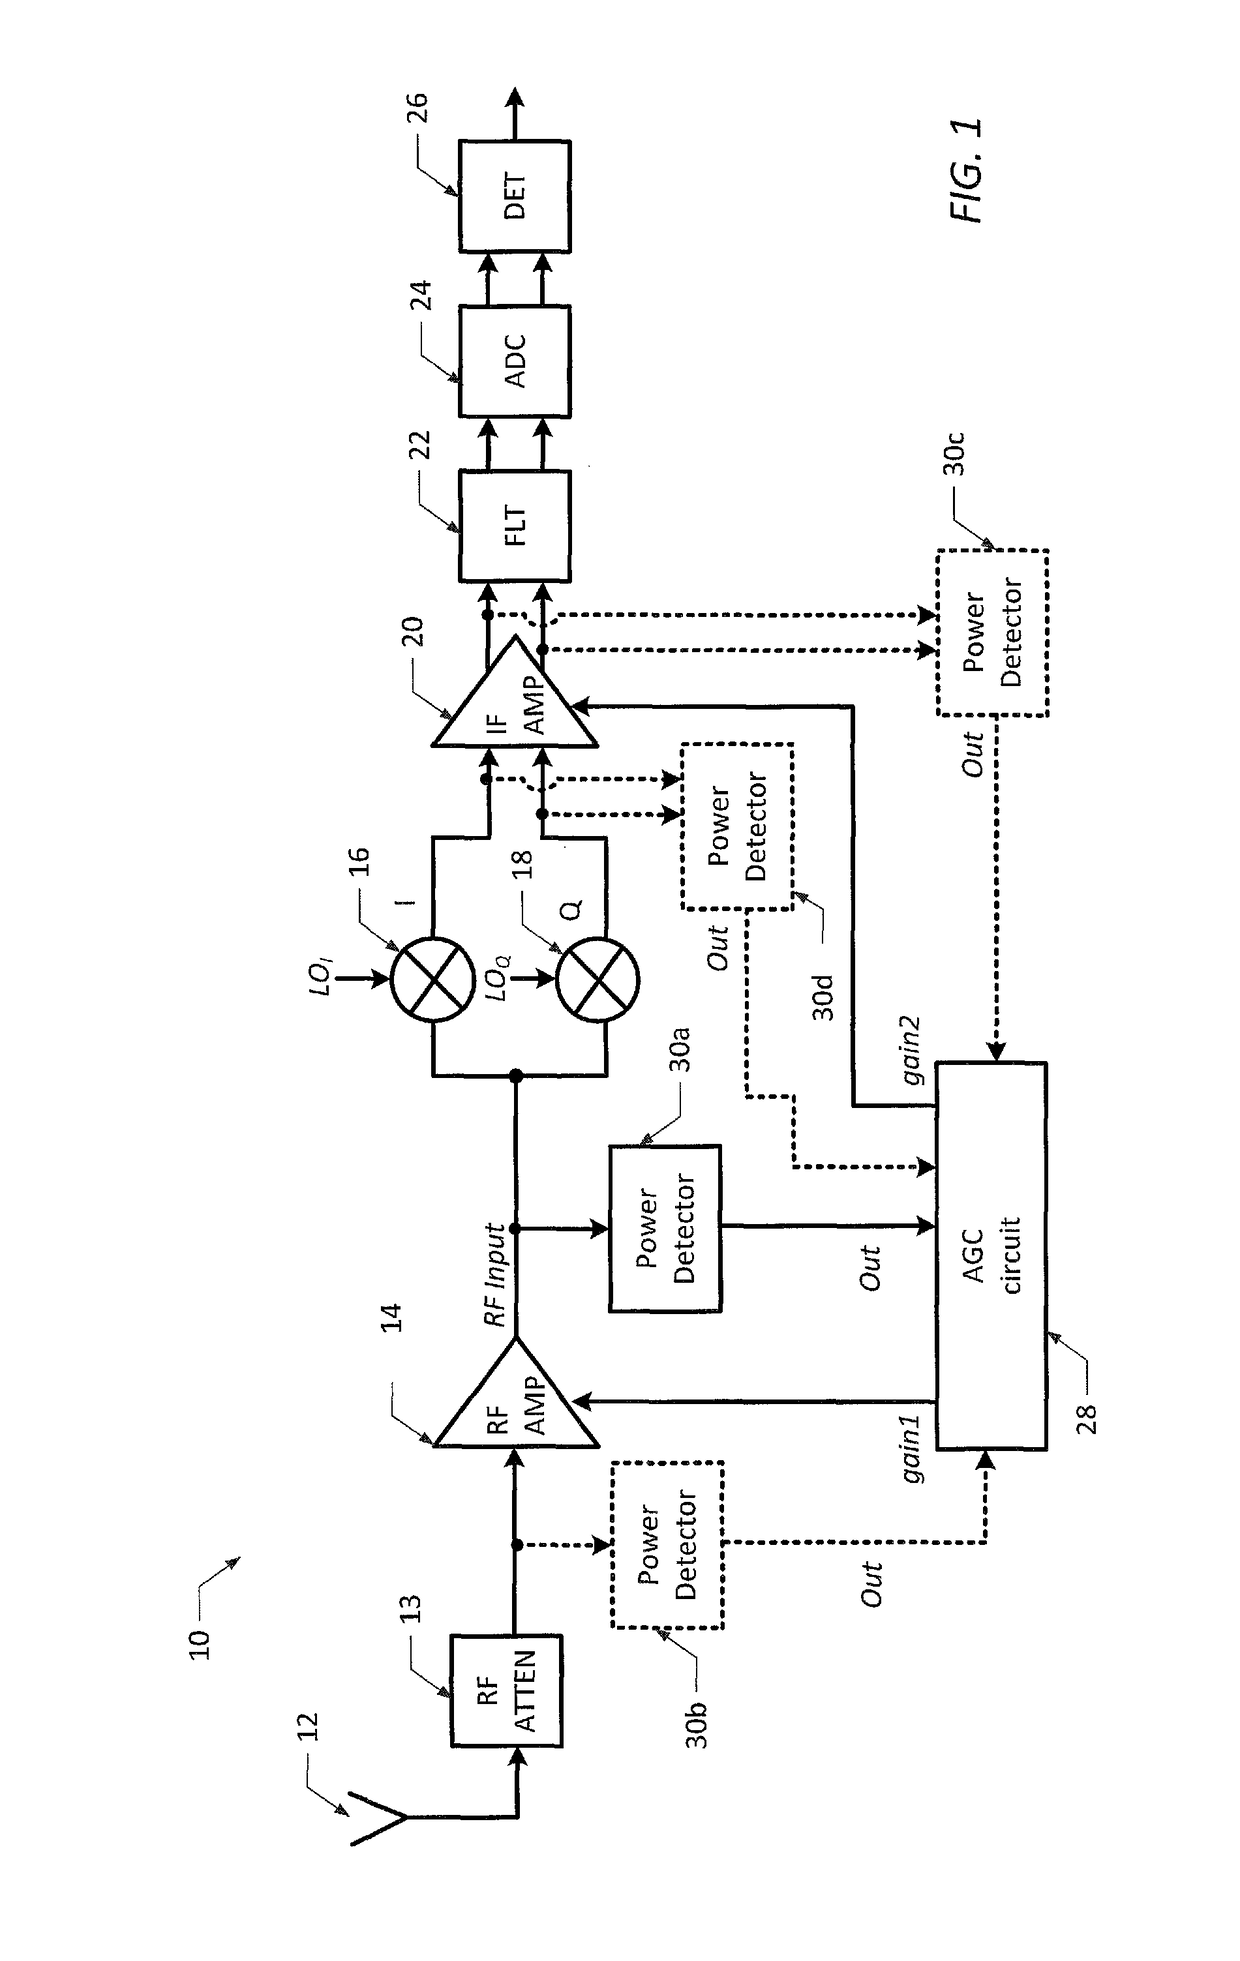 Accurate, low-power power detector circuits and related methods